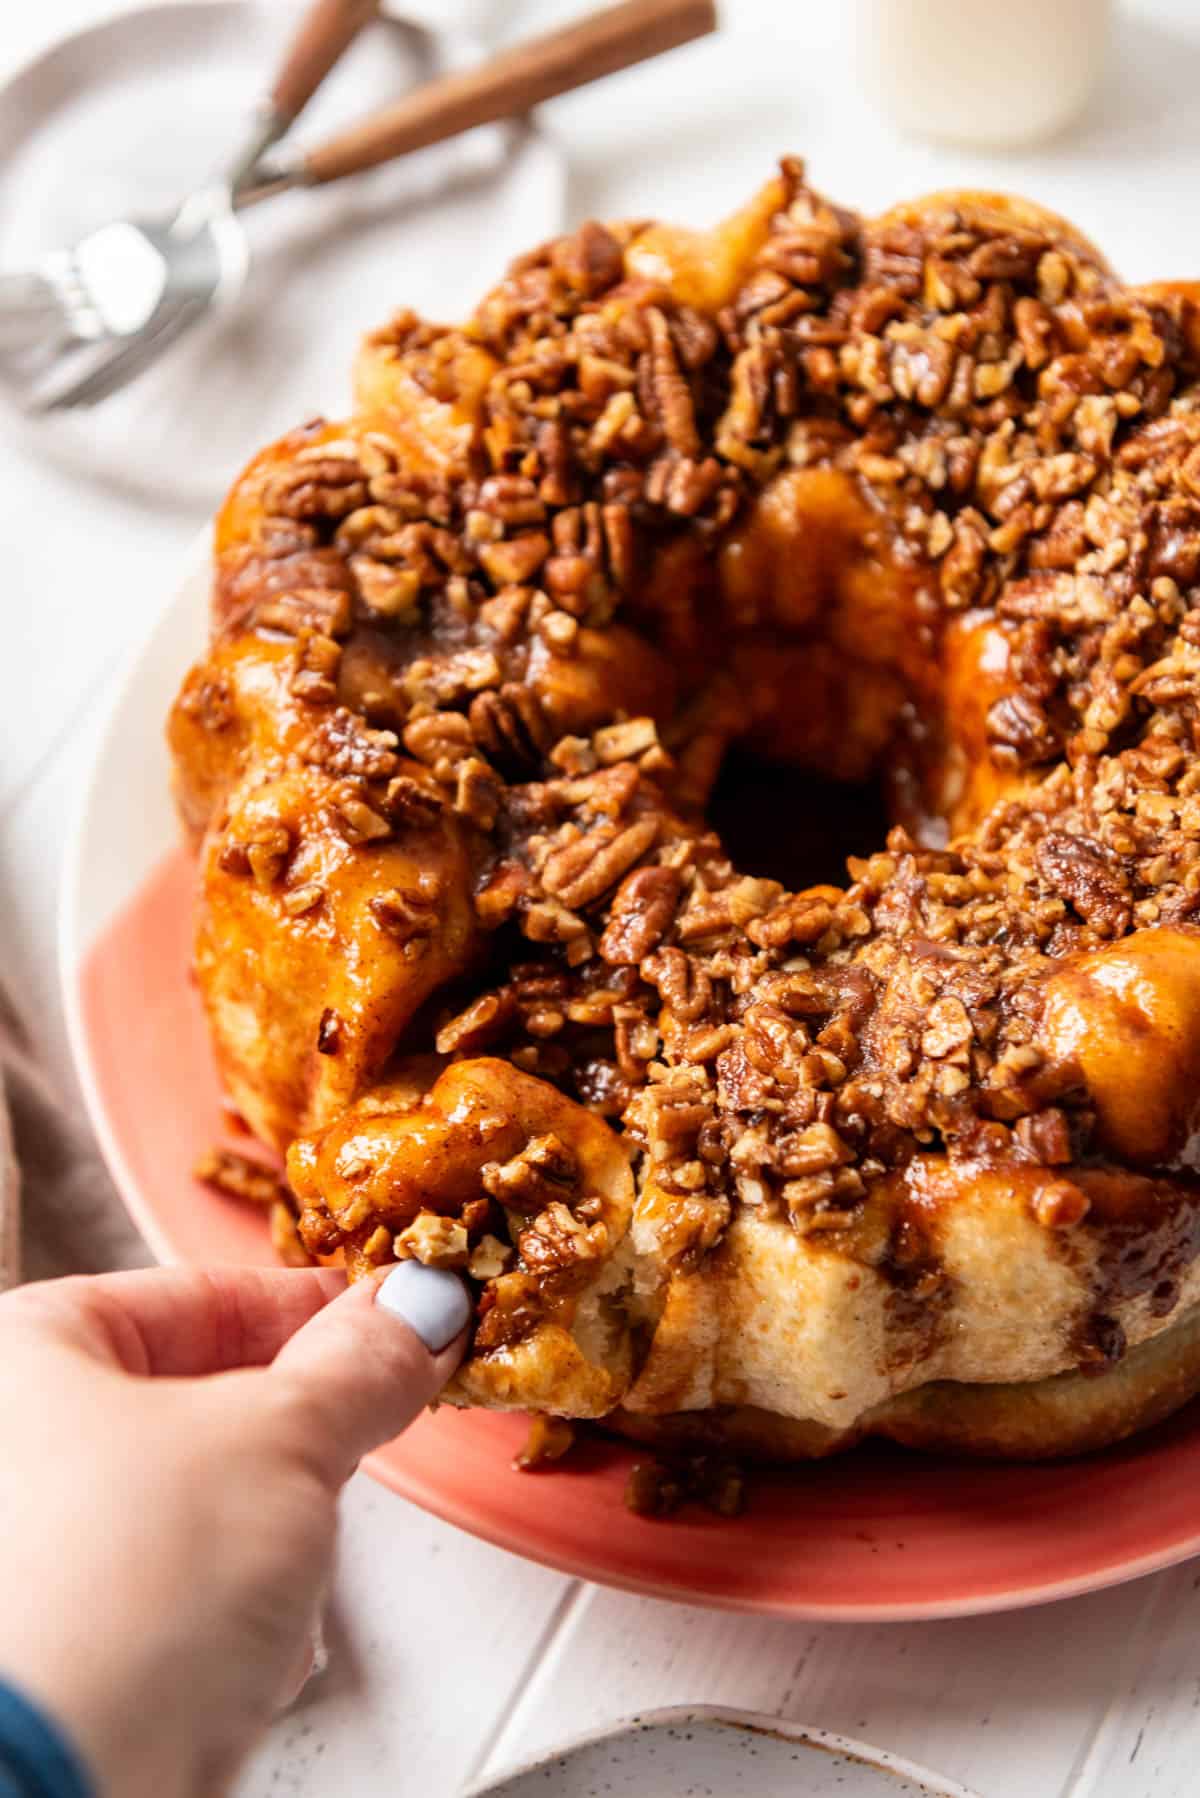 An image of a hand pulling apart a piece of caramel pecan monkey bread.